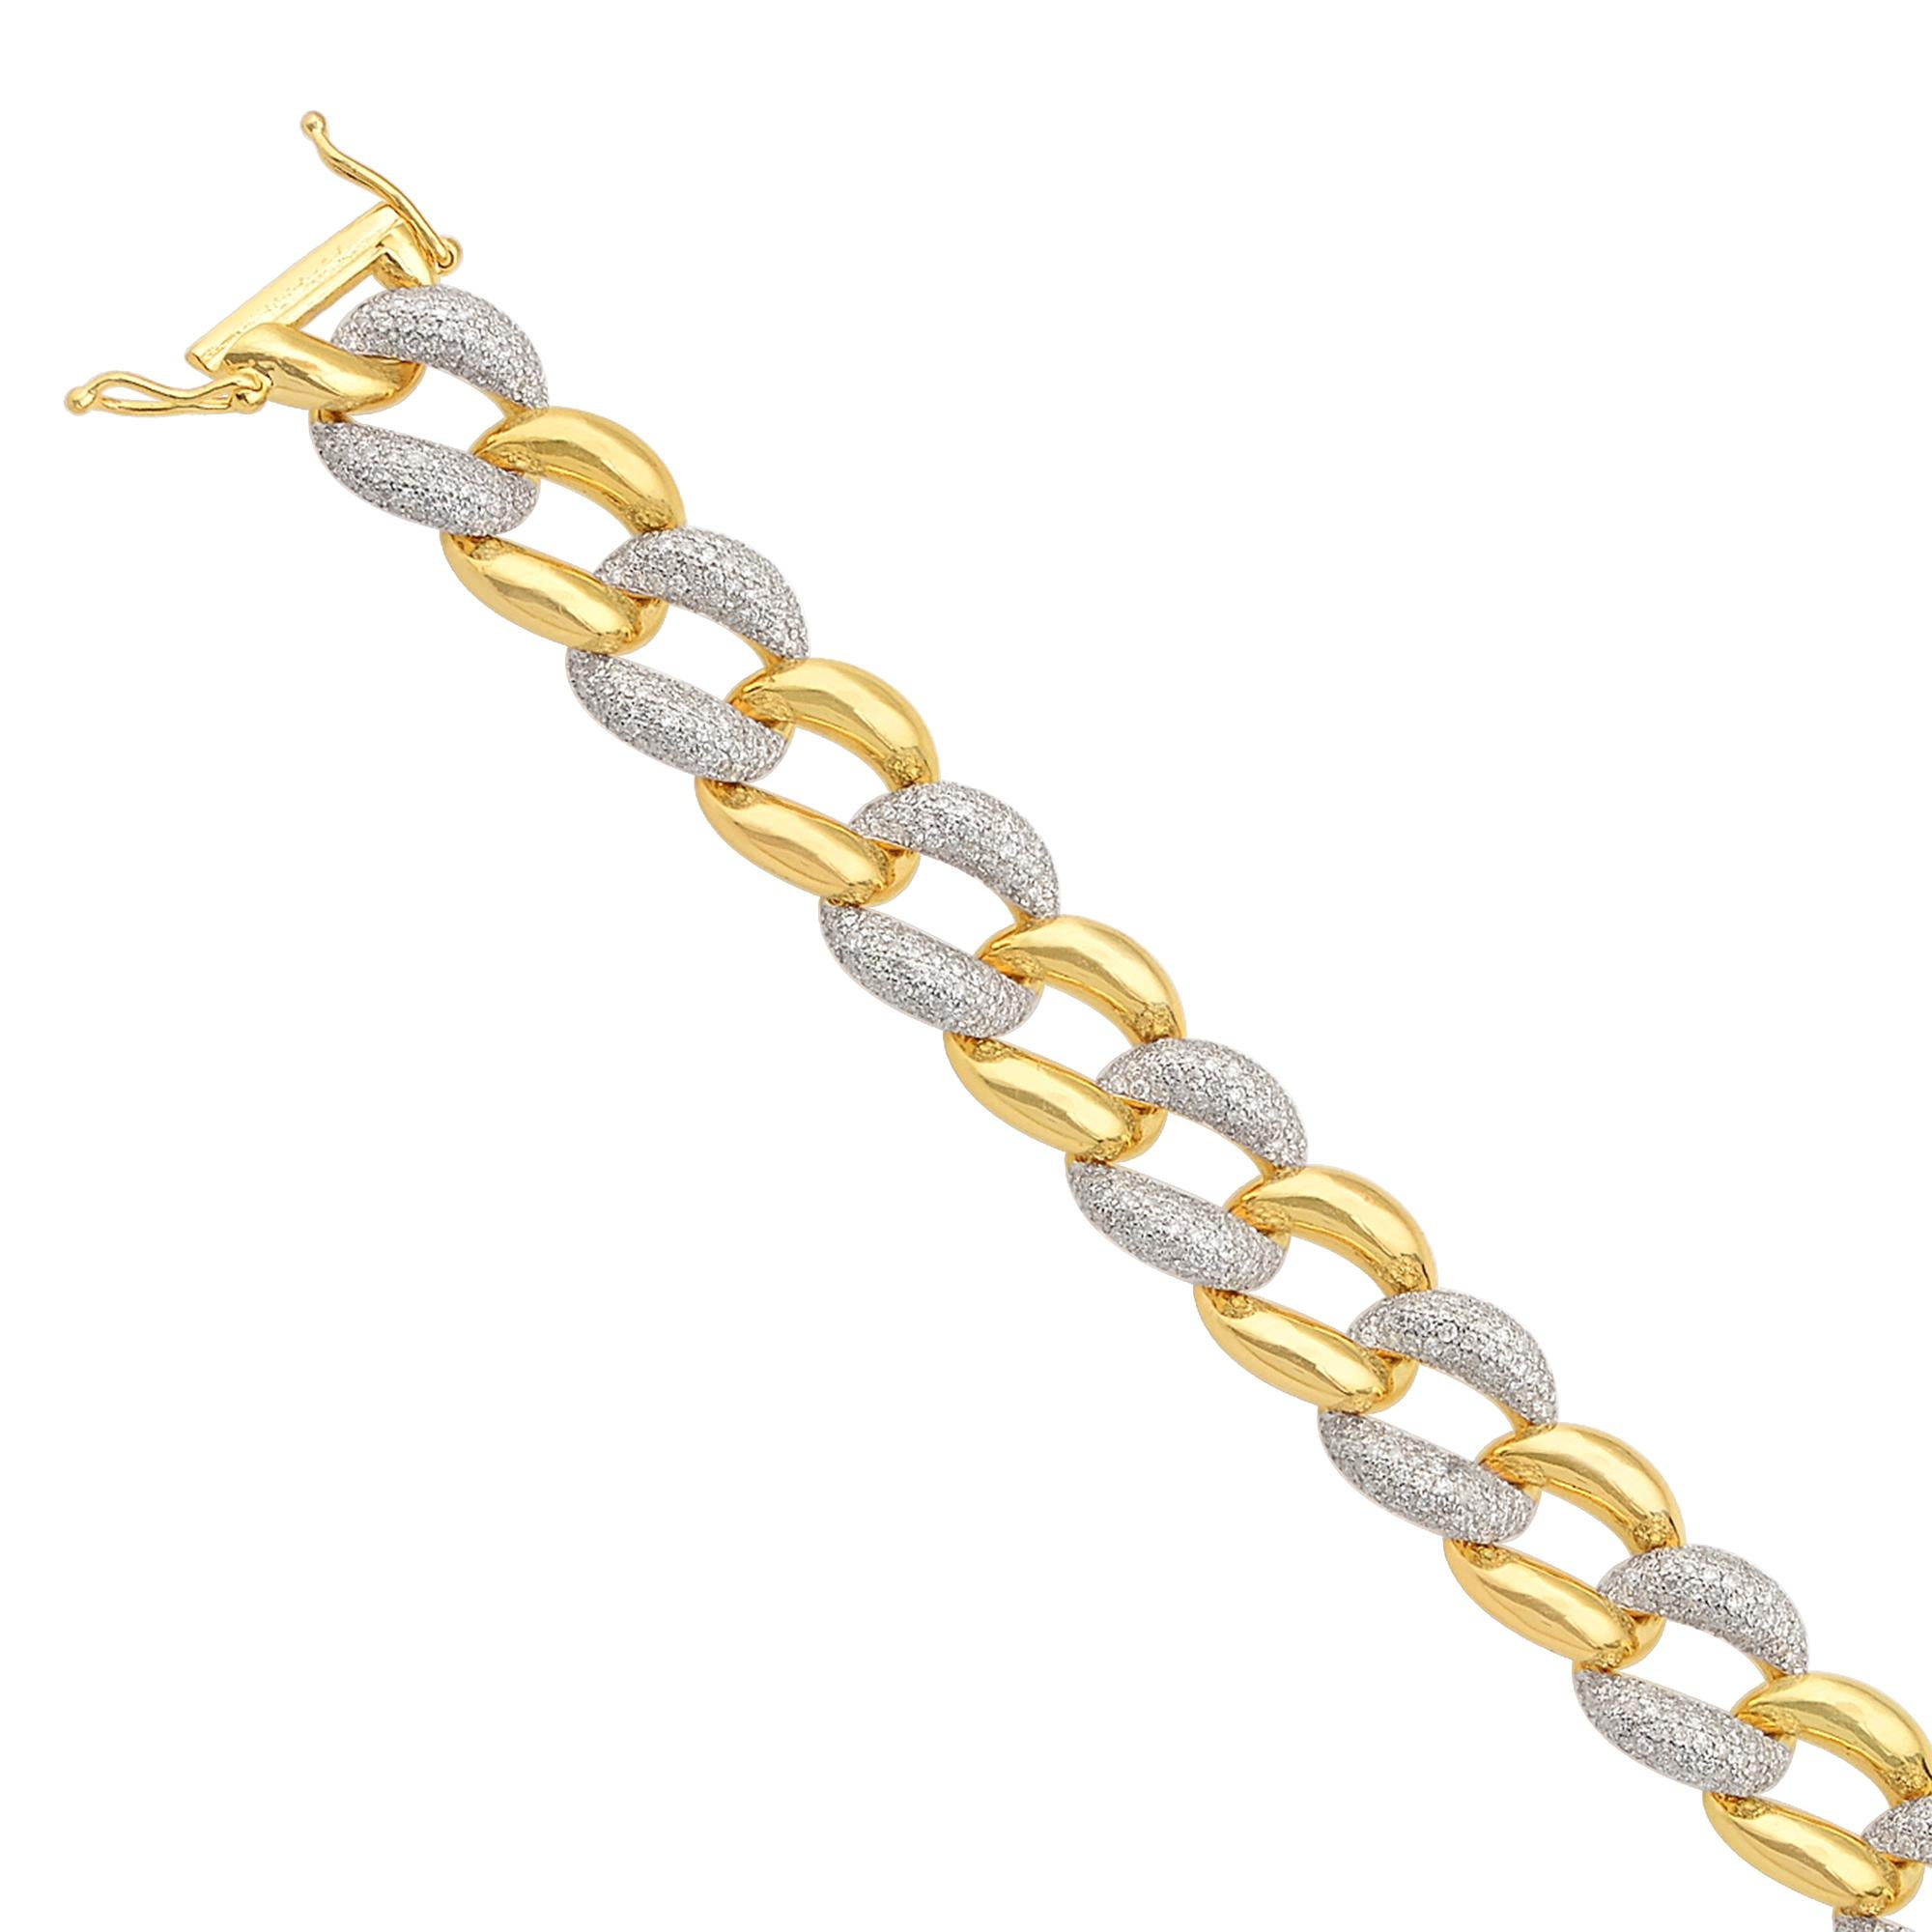 Item Code :- SFBR-4075
Gross Wt :- 19.45 gm
14k Solid Yellow Gold Wt :- 18.55 gm
Natural Diamond Wt :- 4.50 carat  ( AVERAGE DIAMOND CLARITY SI1-SI2 & COLOR H-I )
Bracelet Length :- 7 Inches Long

✦ Sizing
.....................
We can adjust most